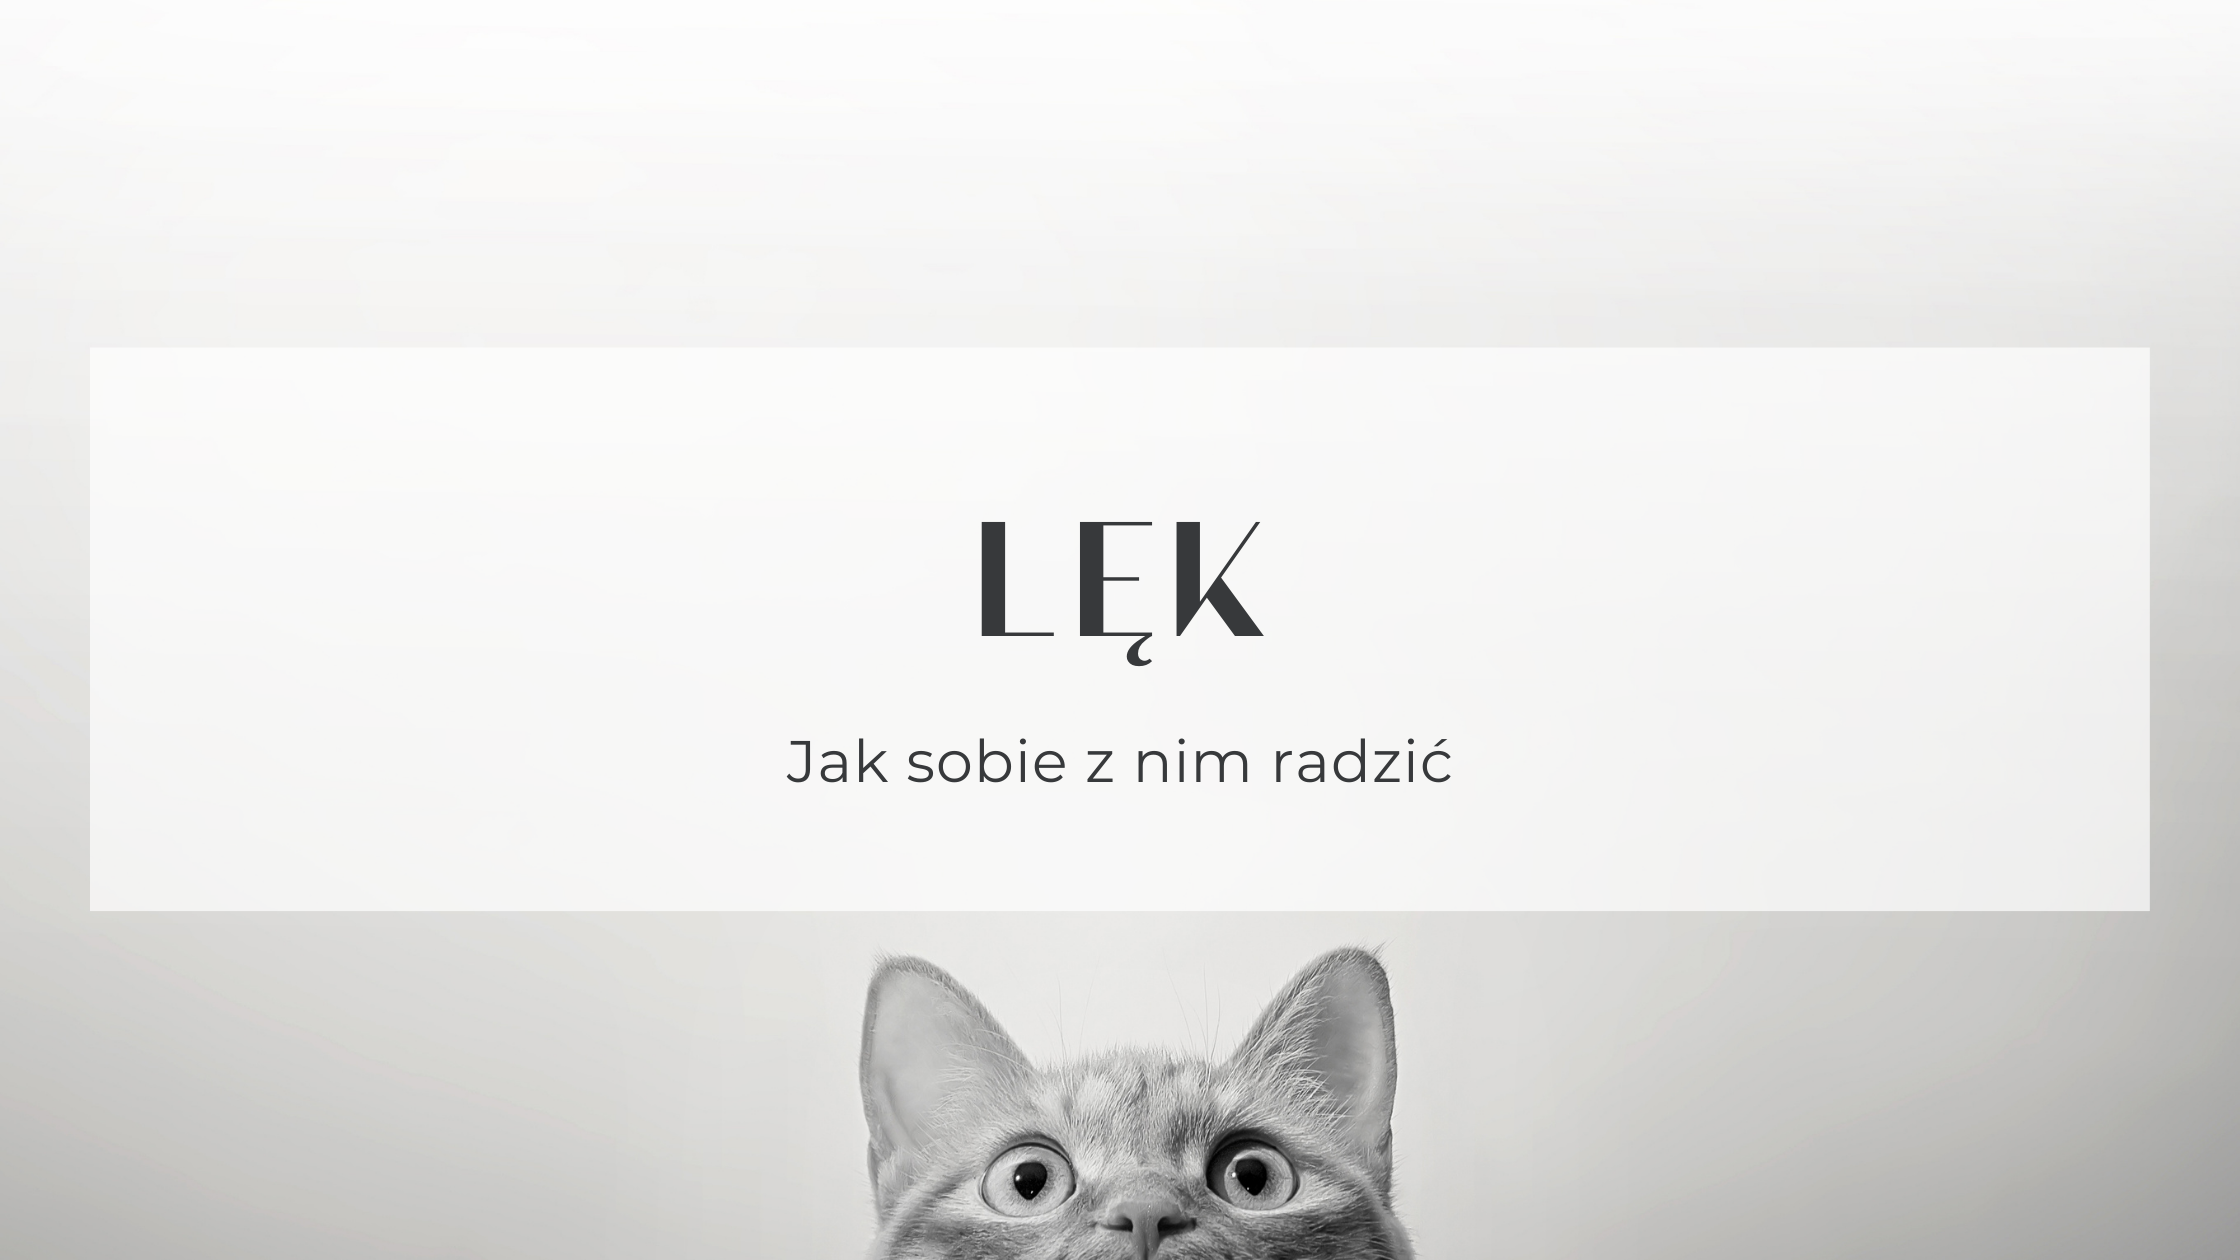 You are currently viewing Lęk